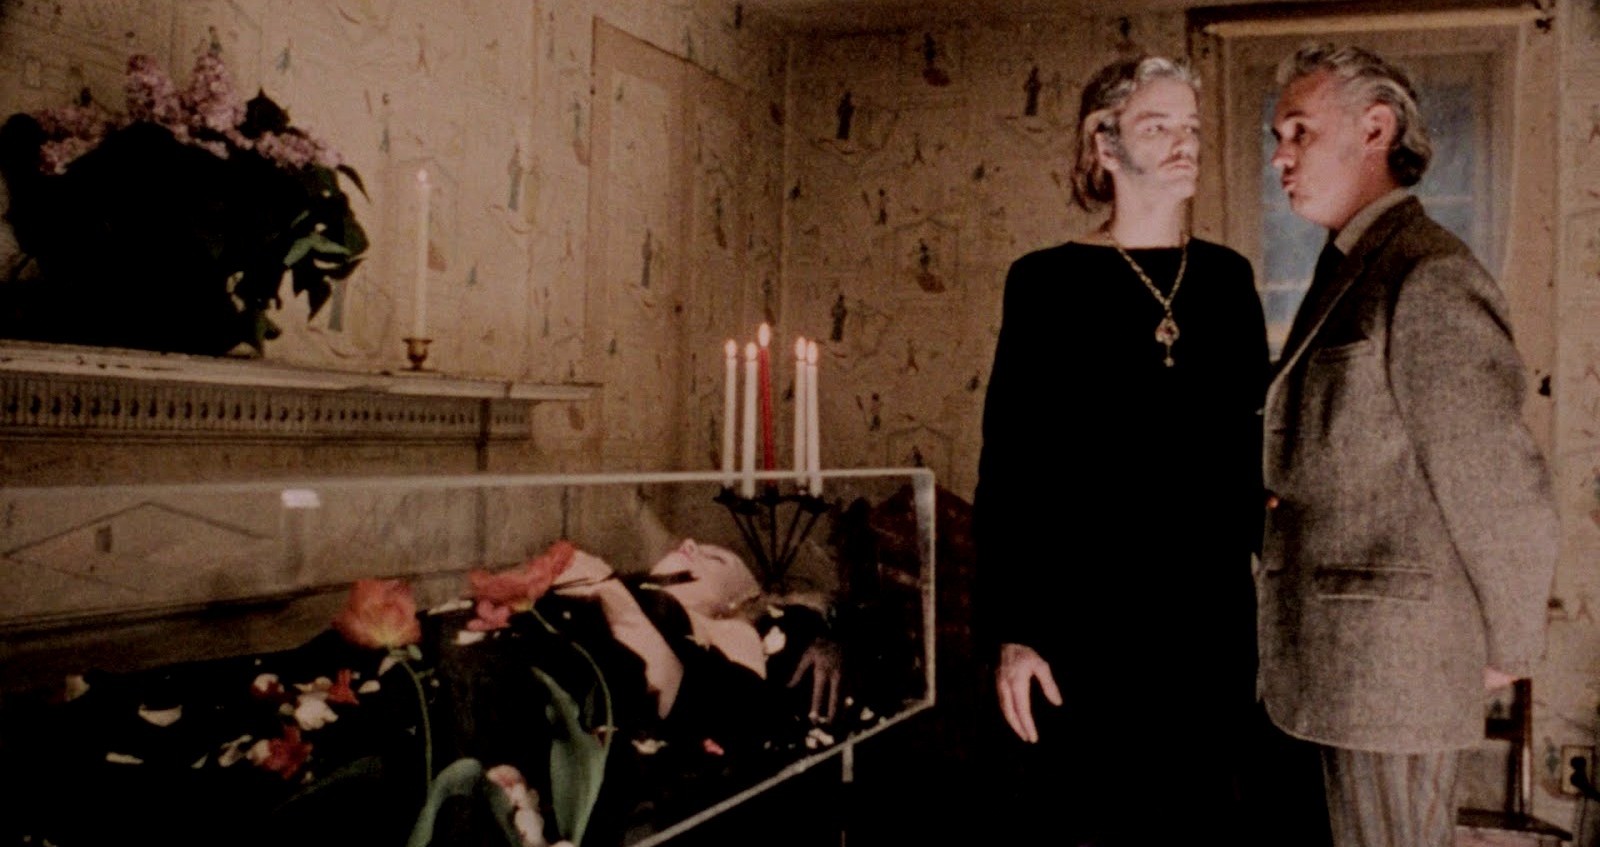 Druid cultsists with the body of their queen in Invasion of the Blood Farmers (1972)